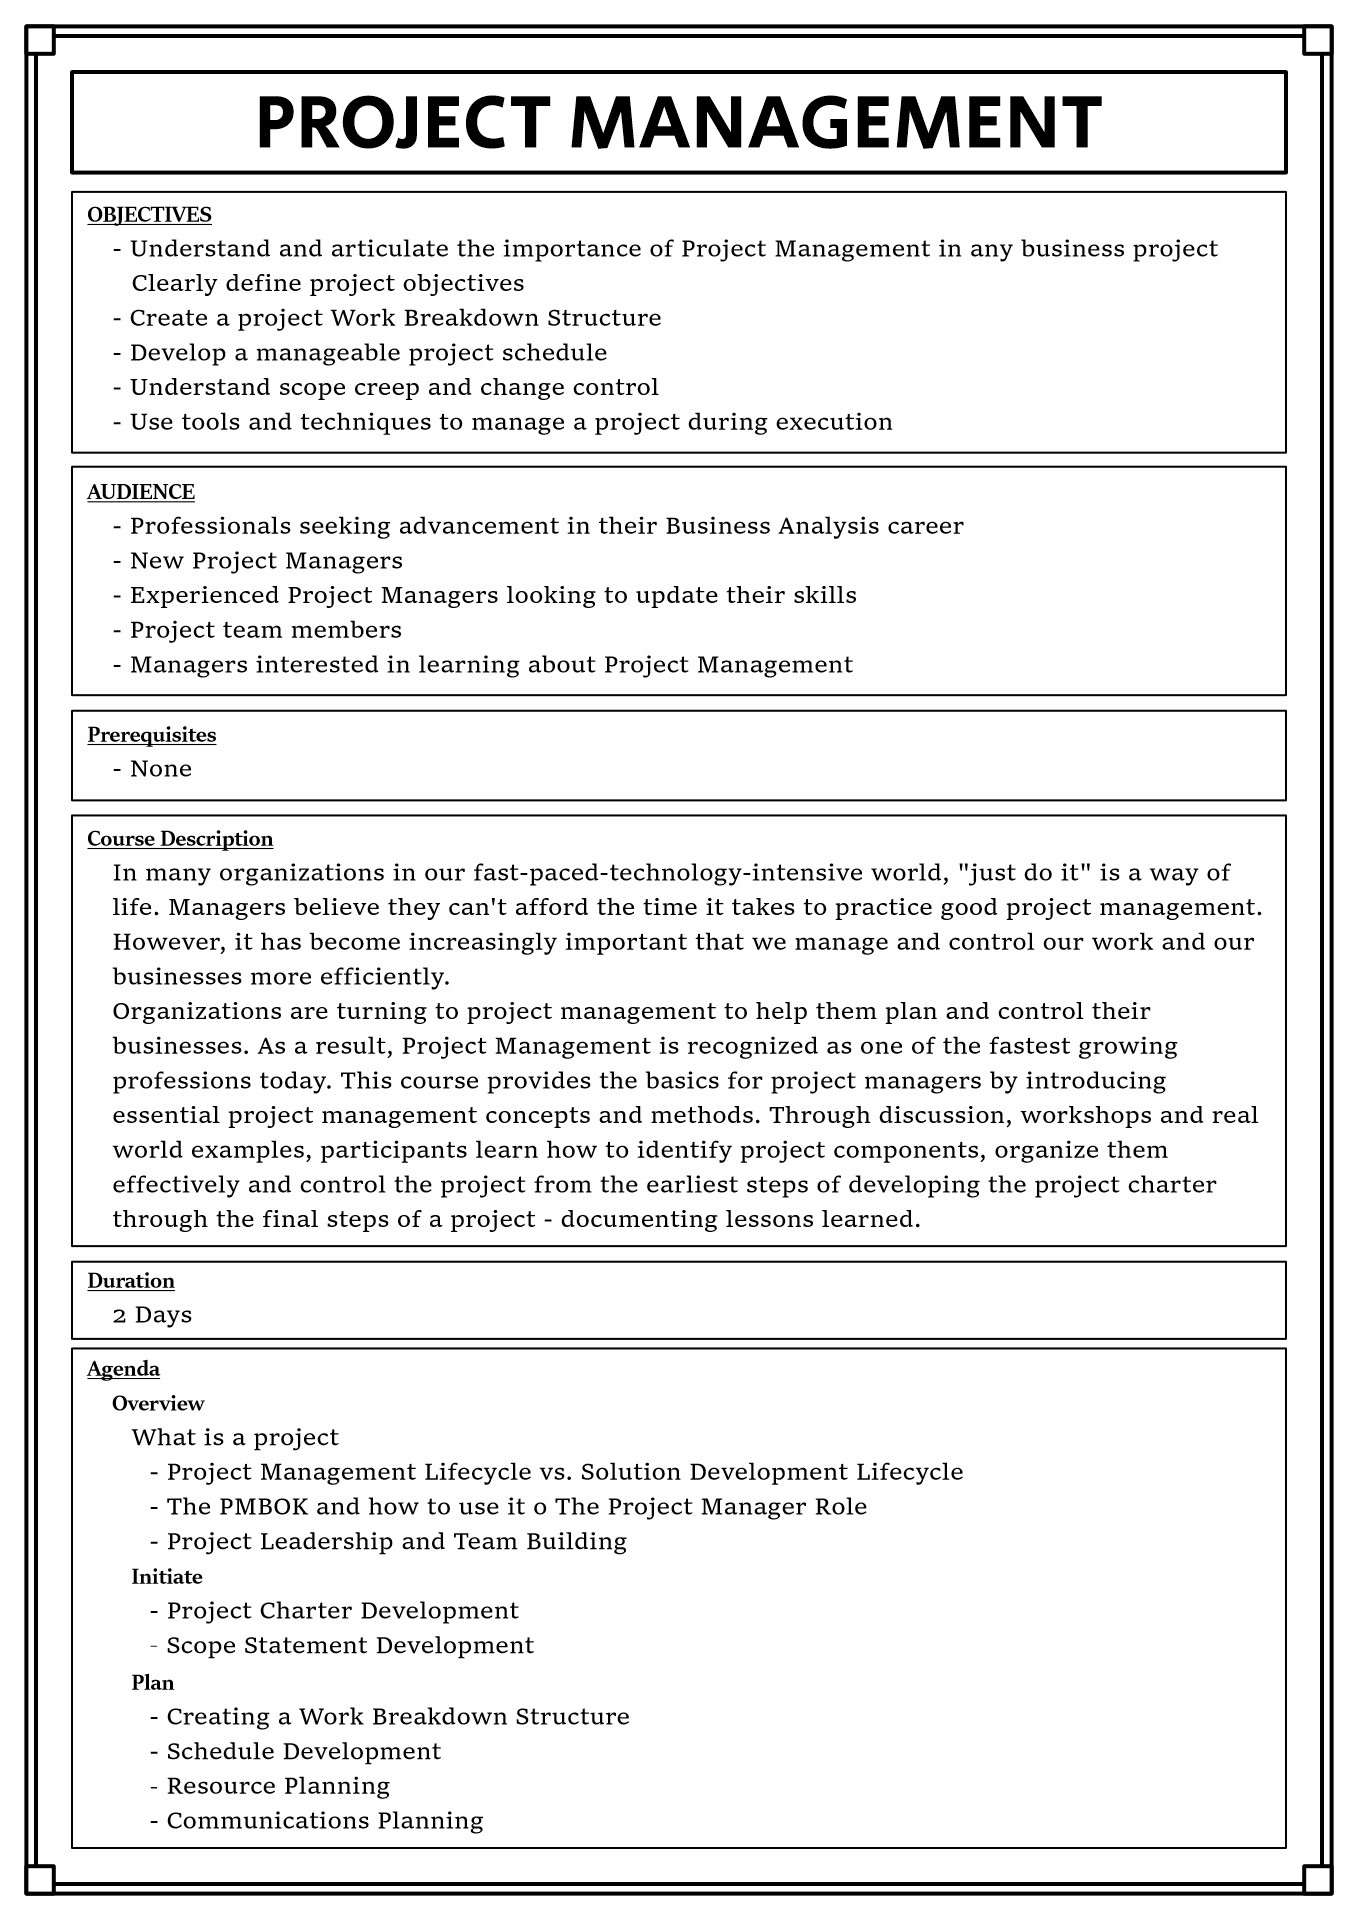 Sample Course Outline Template